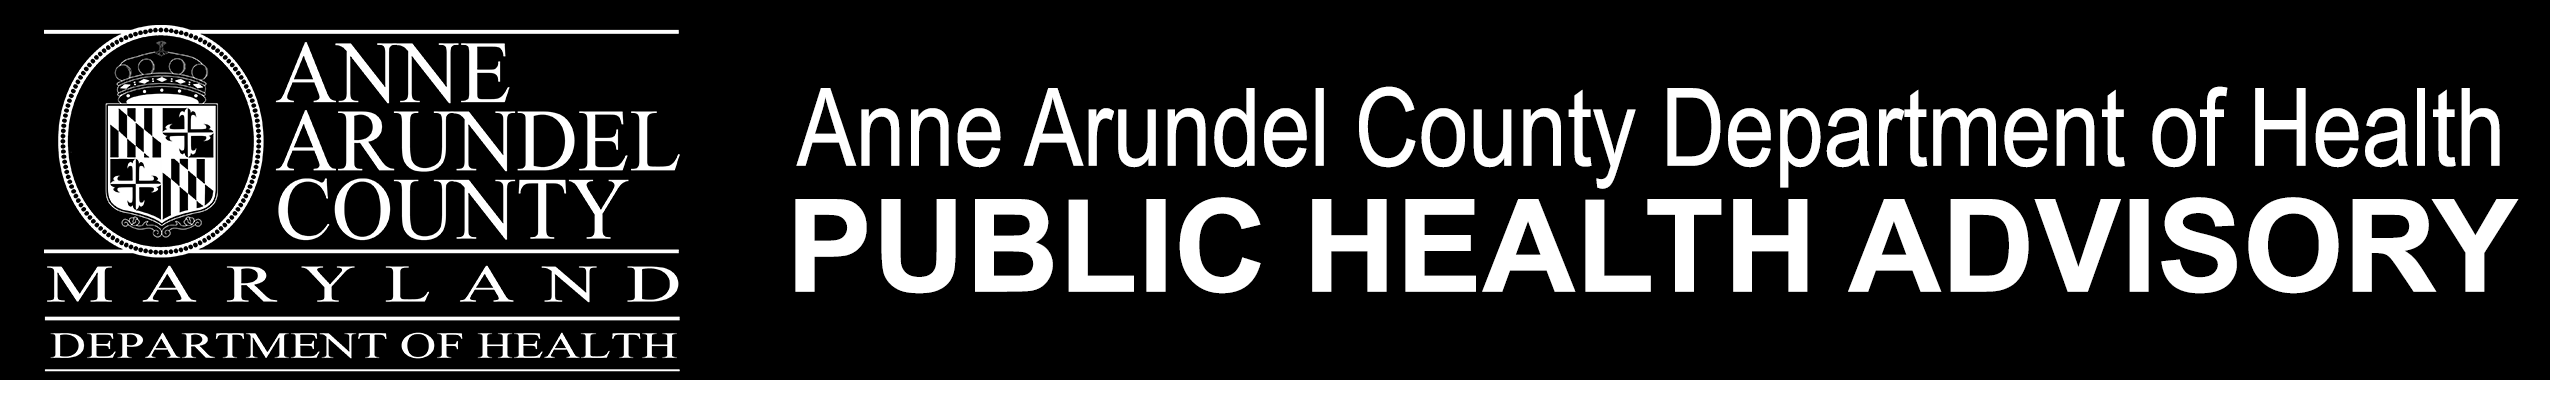 Anne Arundel County Department of Health Logo